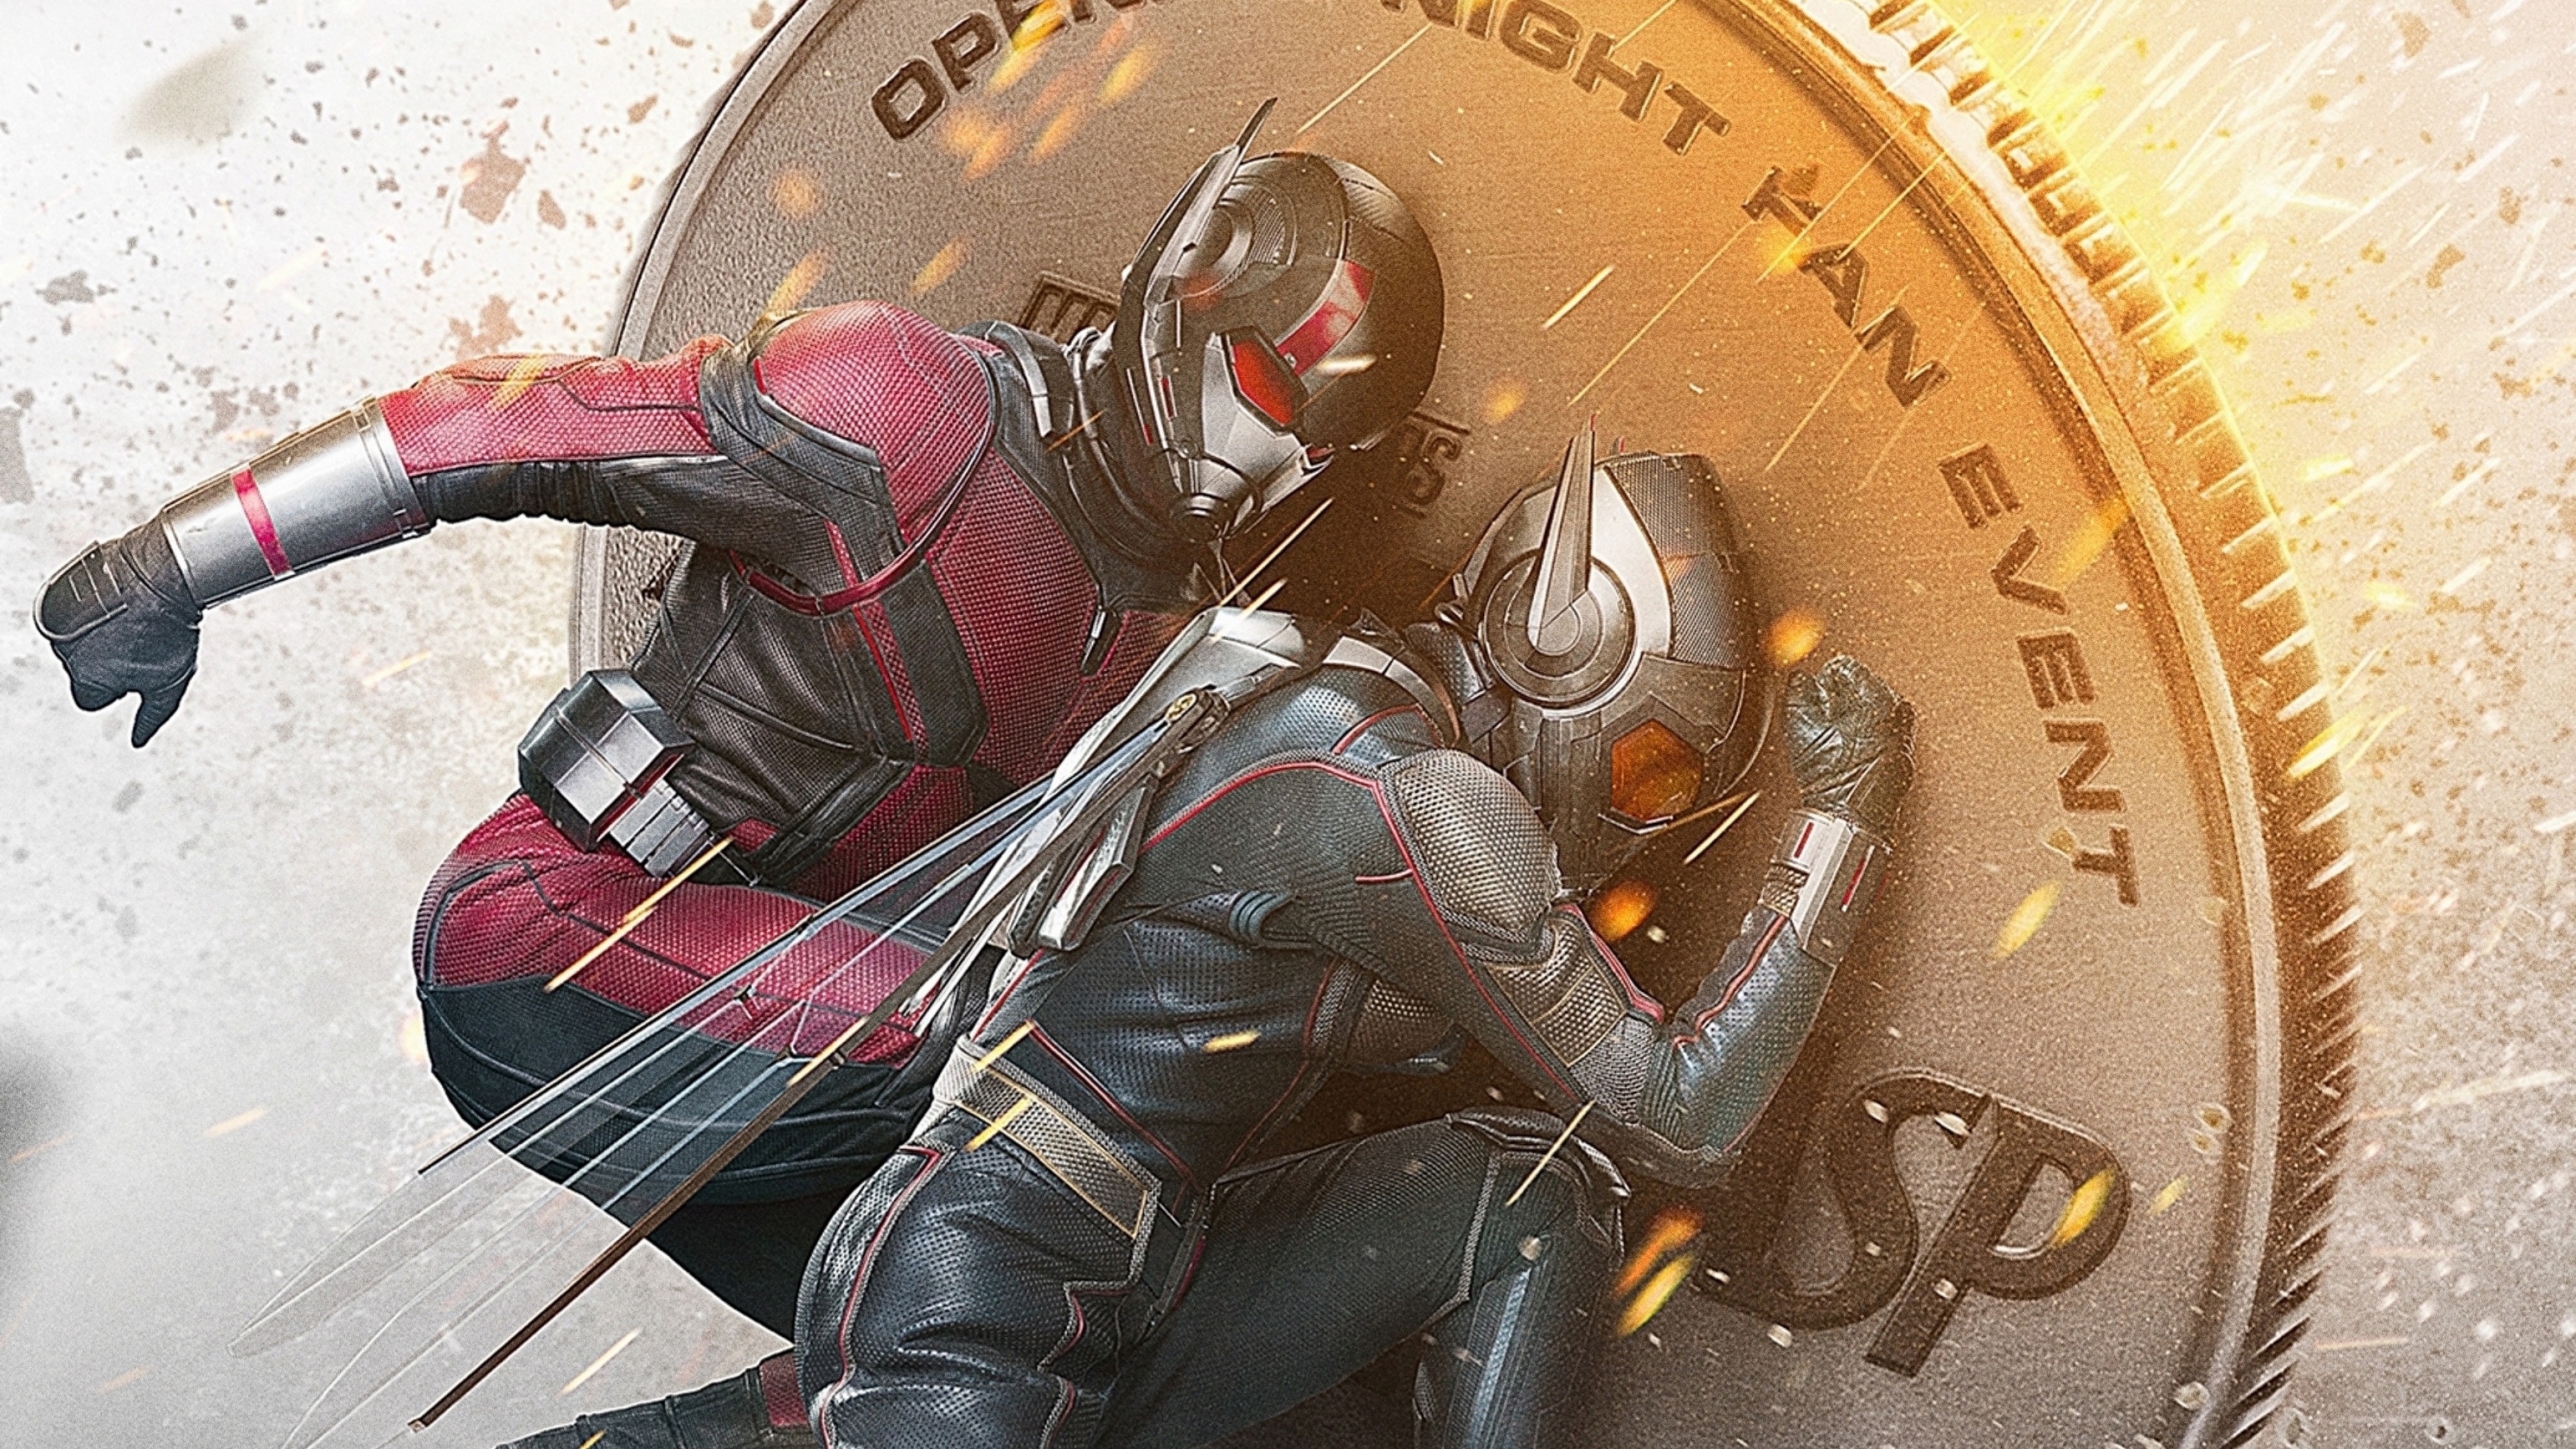 ant-man-and-the-wasp-3840x2160-action-adventure-sci-fi-marvel-comics-14800.jpg